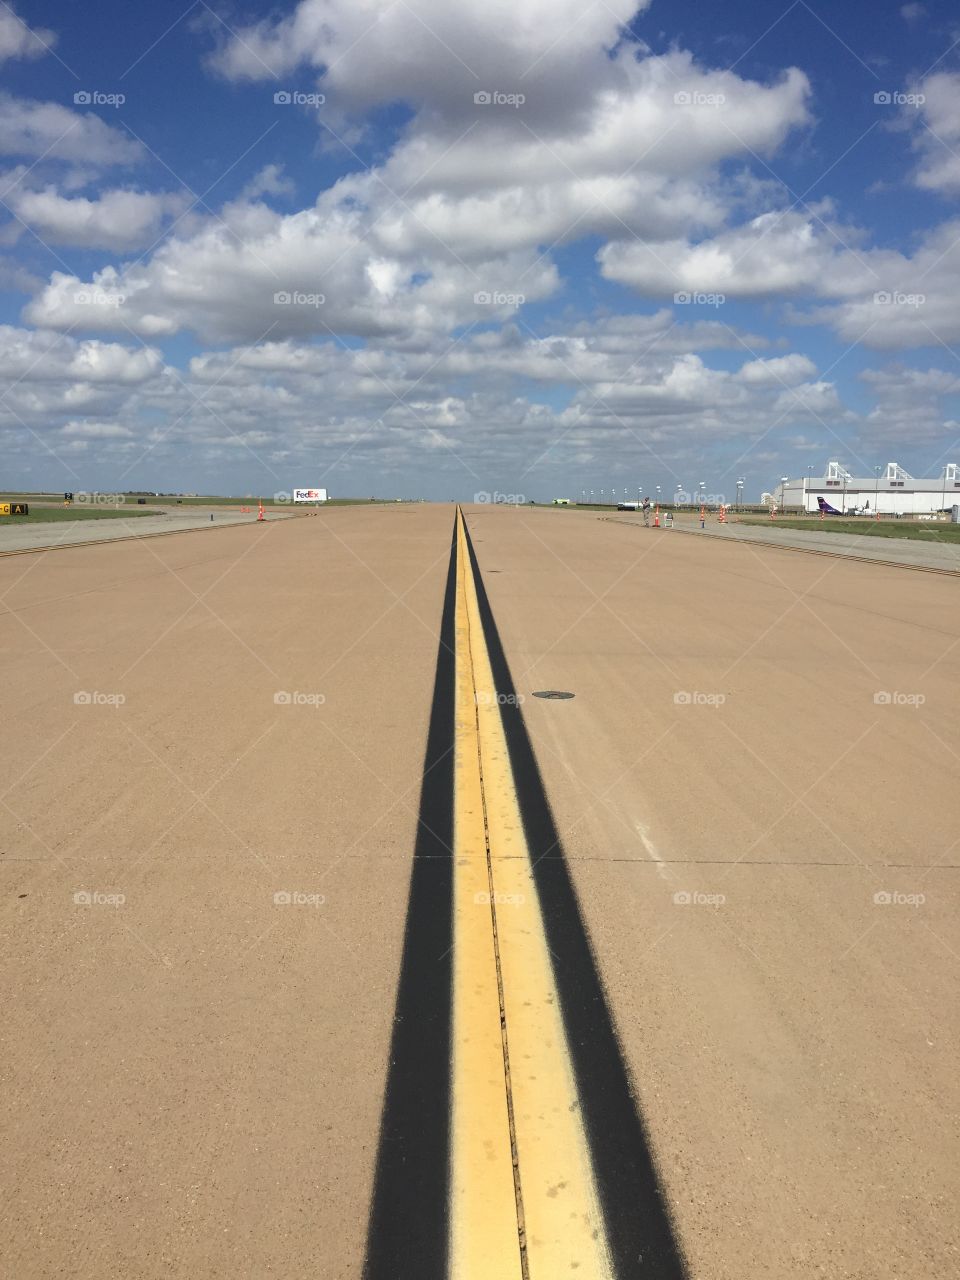 Standing on the runway...